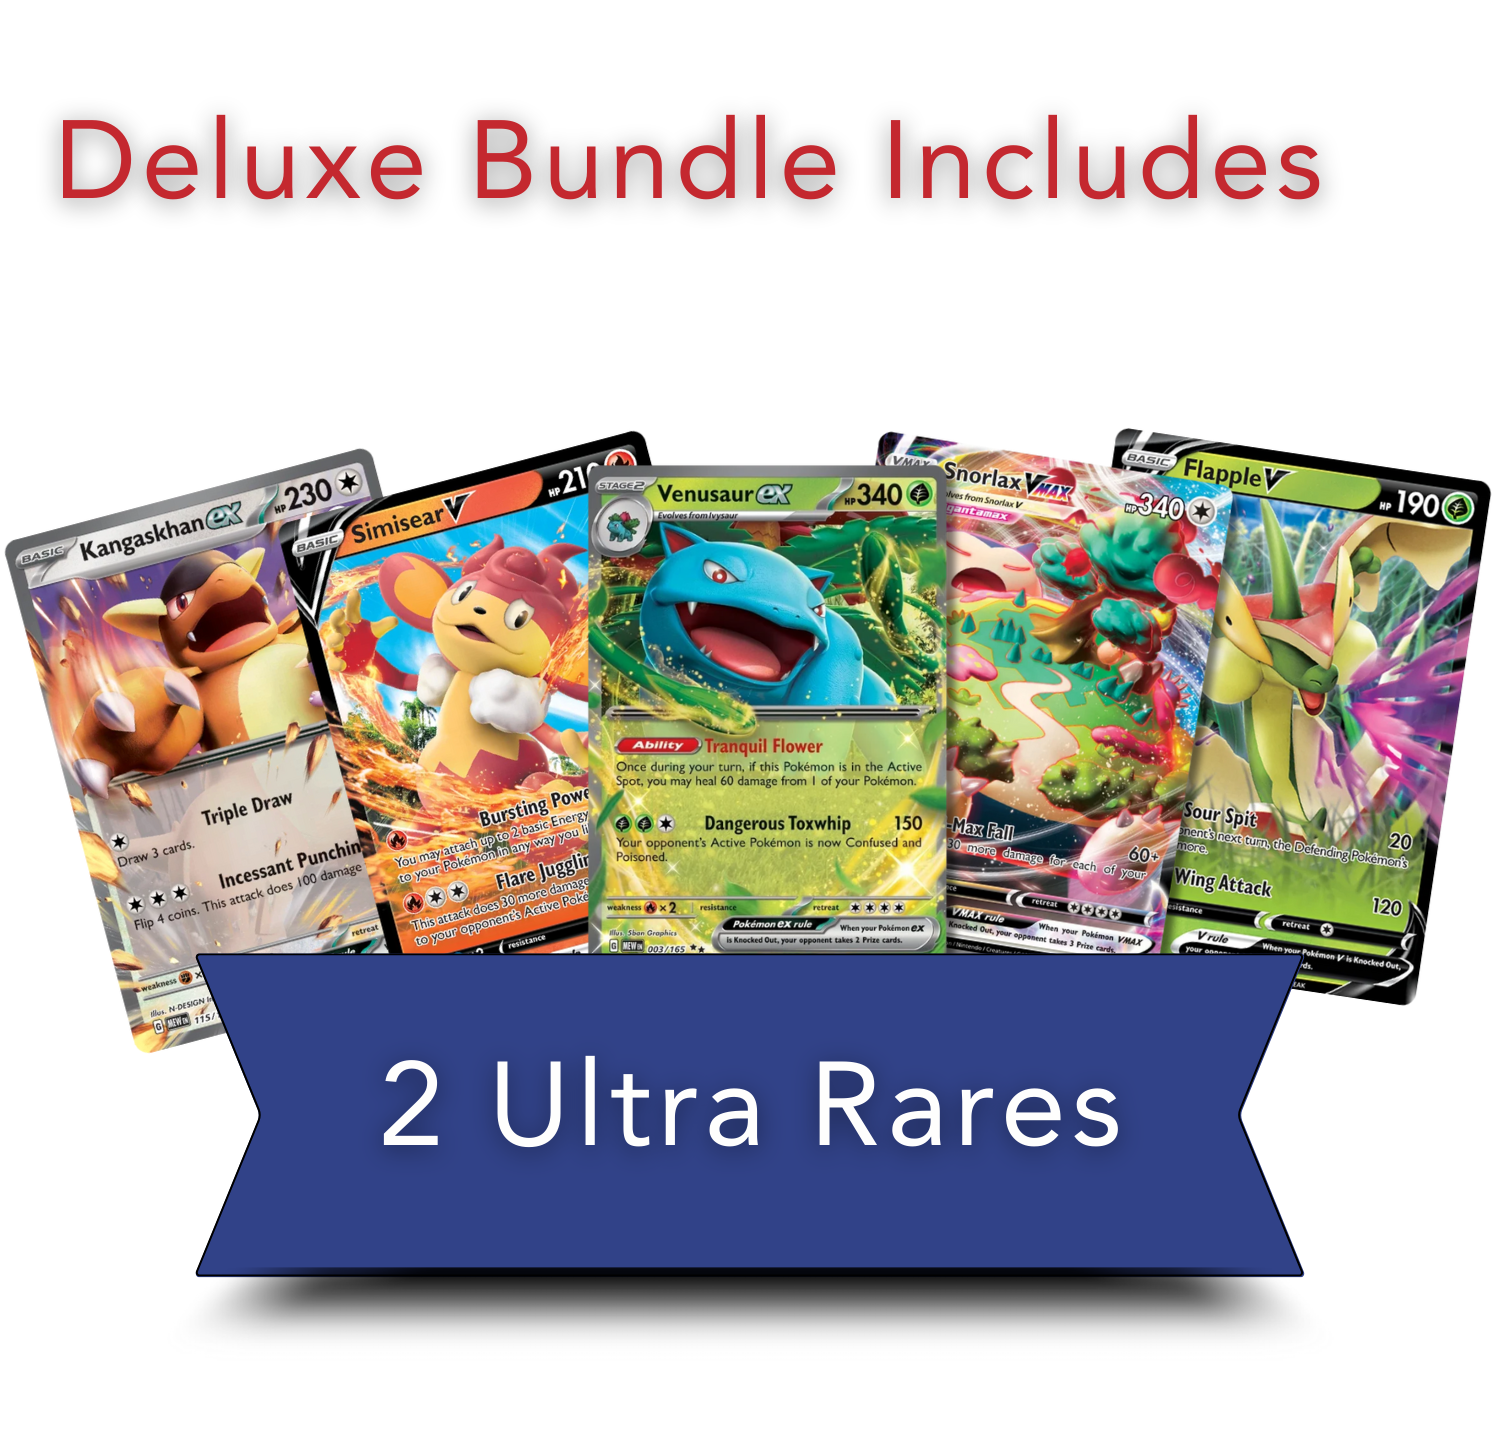 Exclusive Deluxe Bundle | 50 Genuine Cards | Includes 2 Guaranteed Ultra Rares: Legendary, VSTAR, VMAX, V, GX, or EX | Plus 2 Holos or Rares | BlueProton Deck Box compatible with trading cards